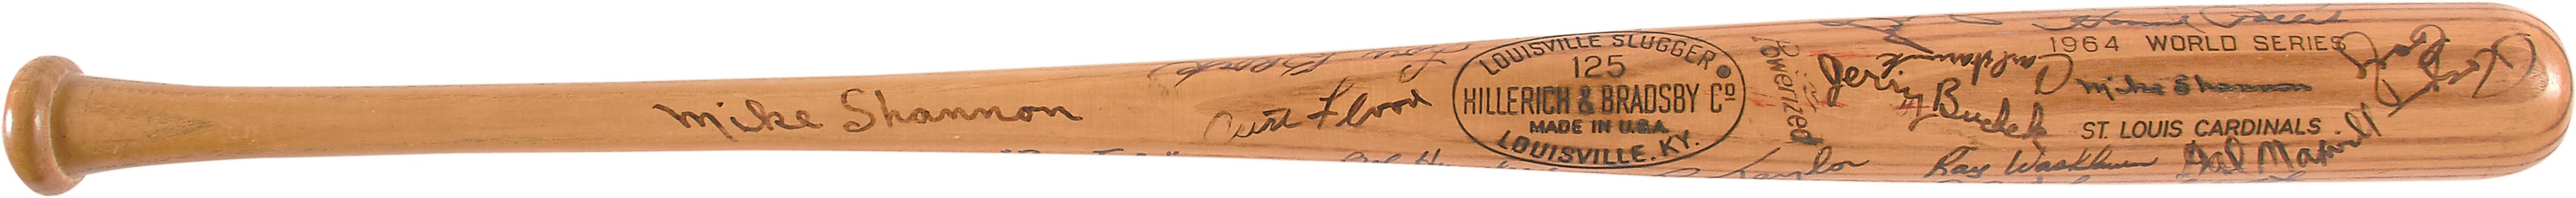 - 1964 Mike Shannon World Series Bat Signed by Cardinals Team